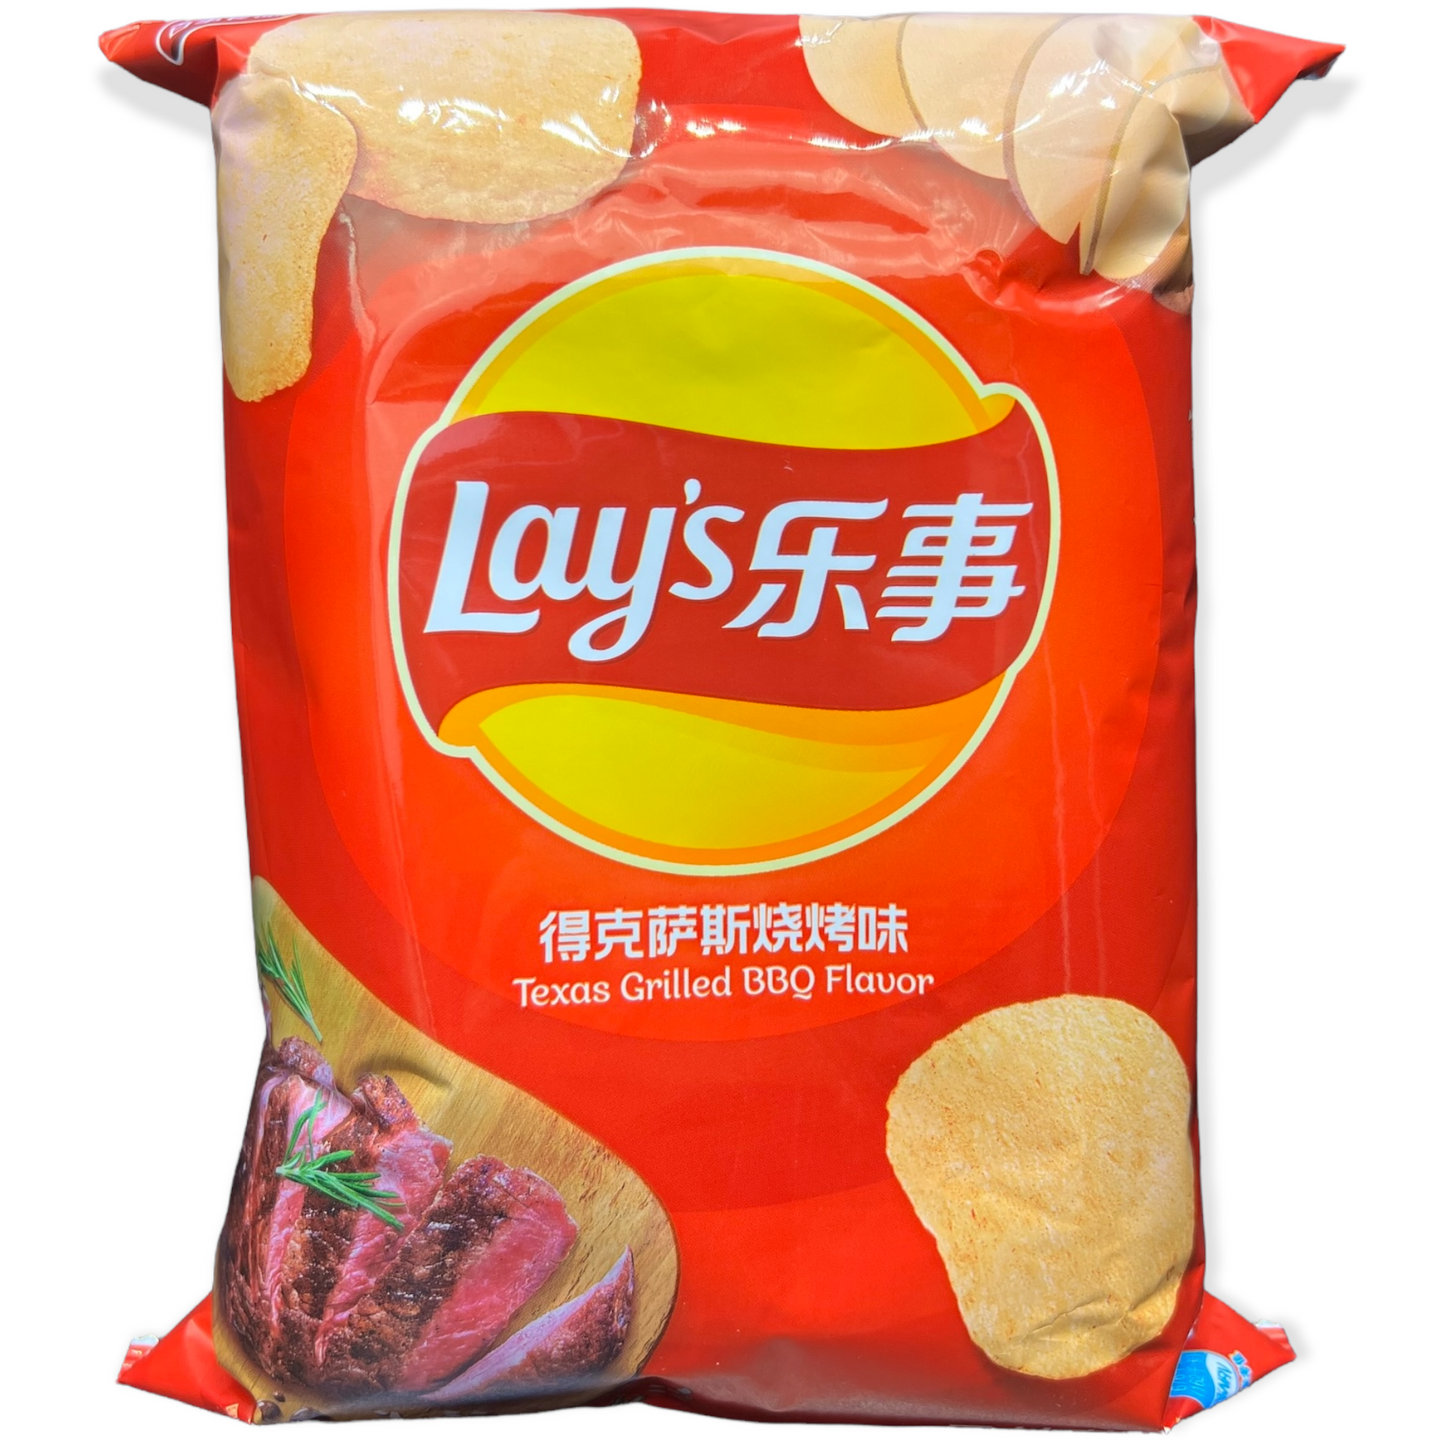 Lays Texas Grilled BBQ